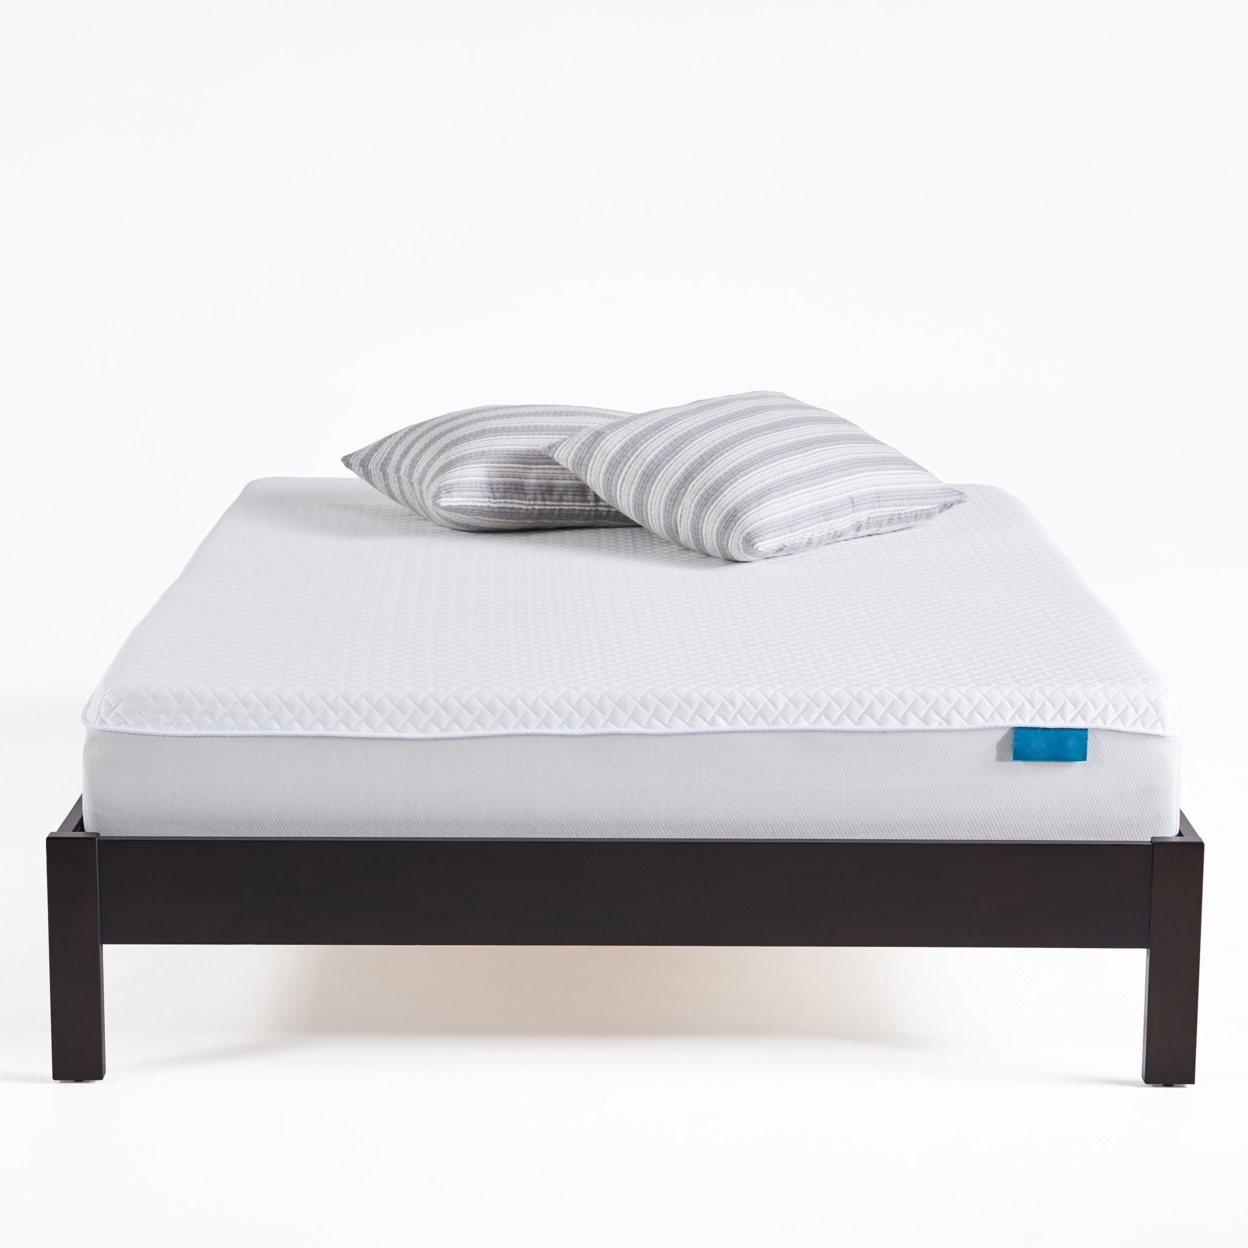 Barchetta 11 Hybrid Medium Firm Cool To Touch Mattress, White And Gray - Full